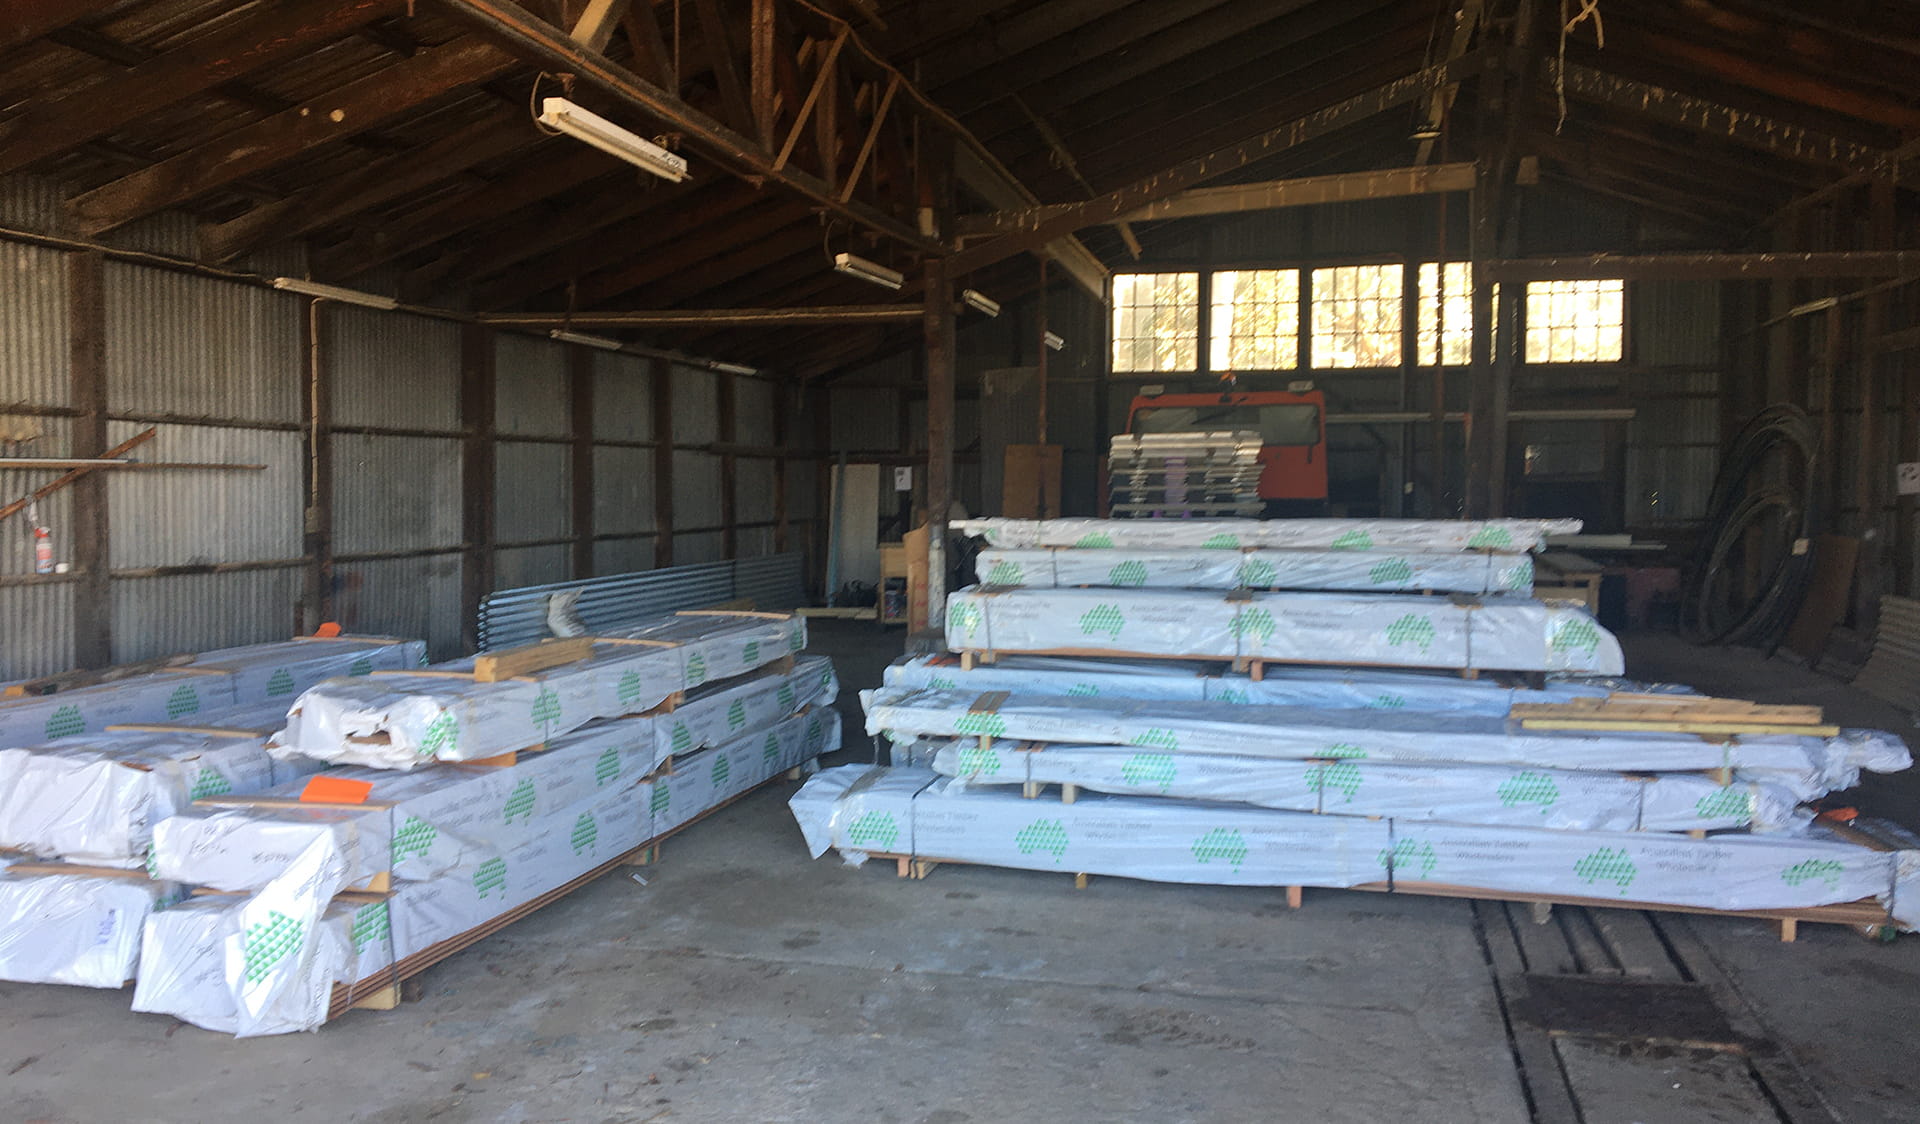 Maintenance works at Mount Buffalo Chalet - new weatherboards arrived for re-cladding work, 20 April 2020.